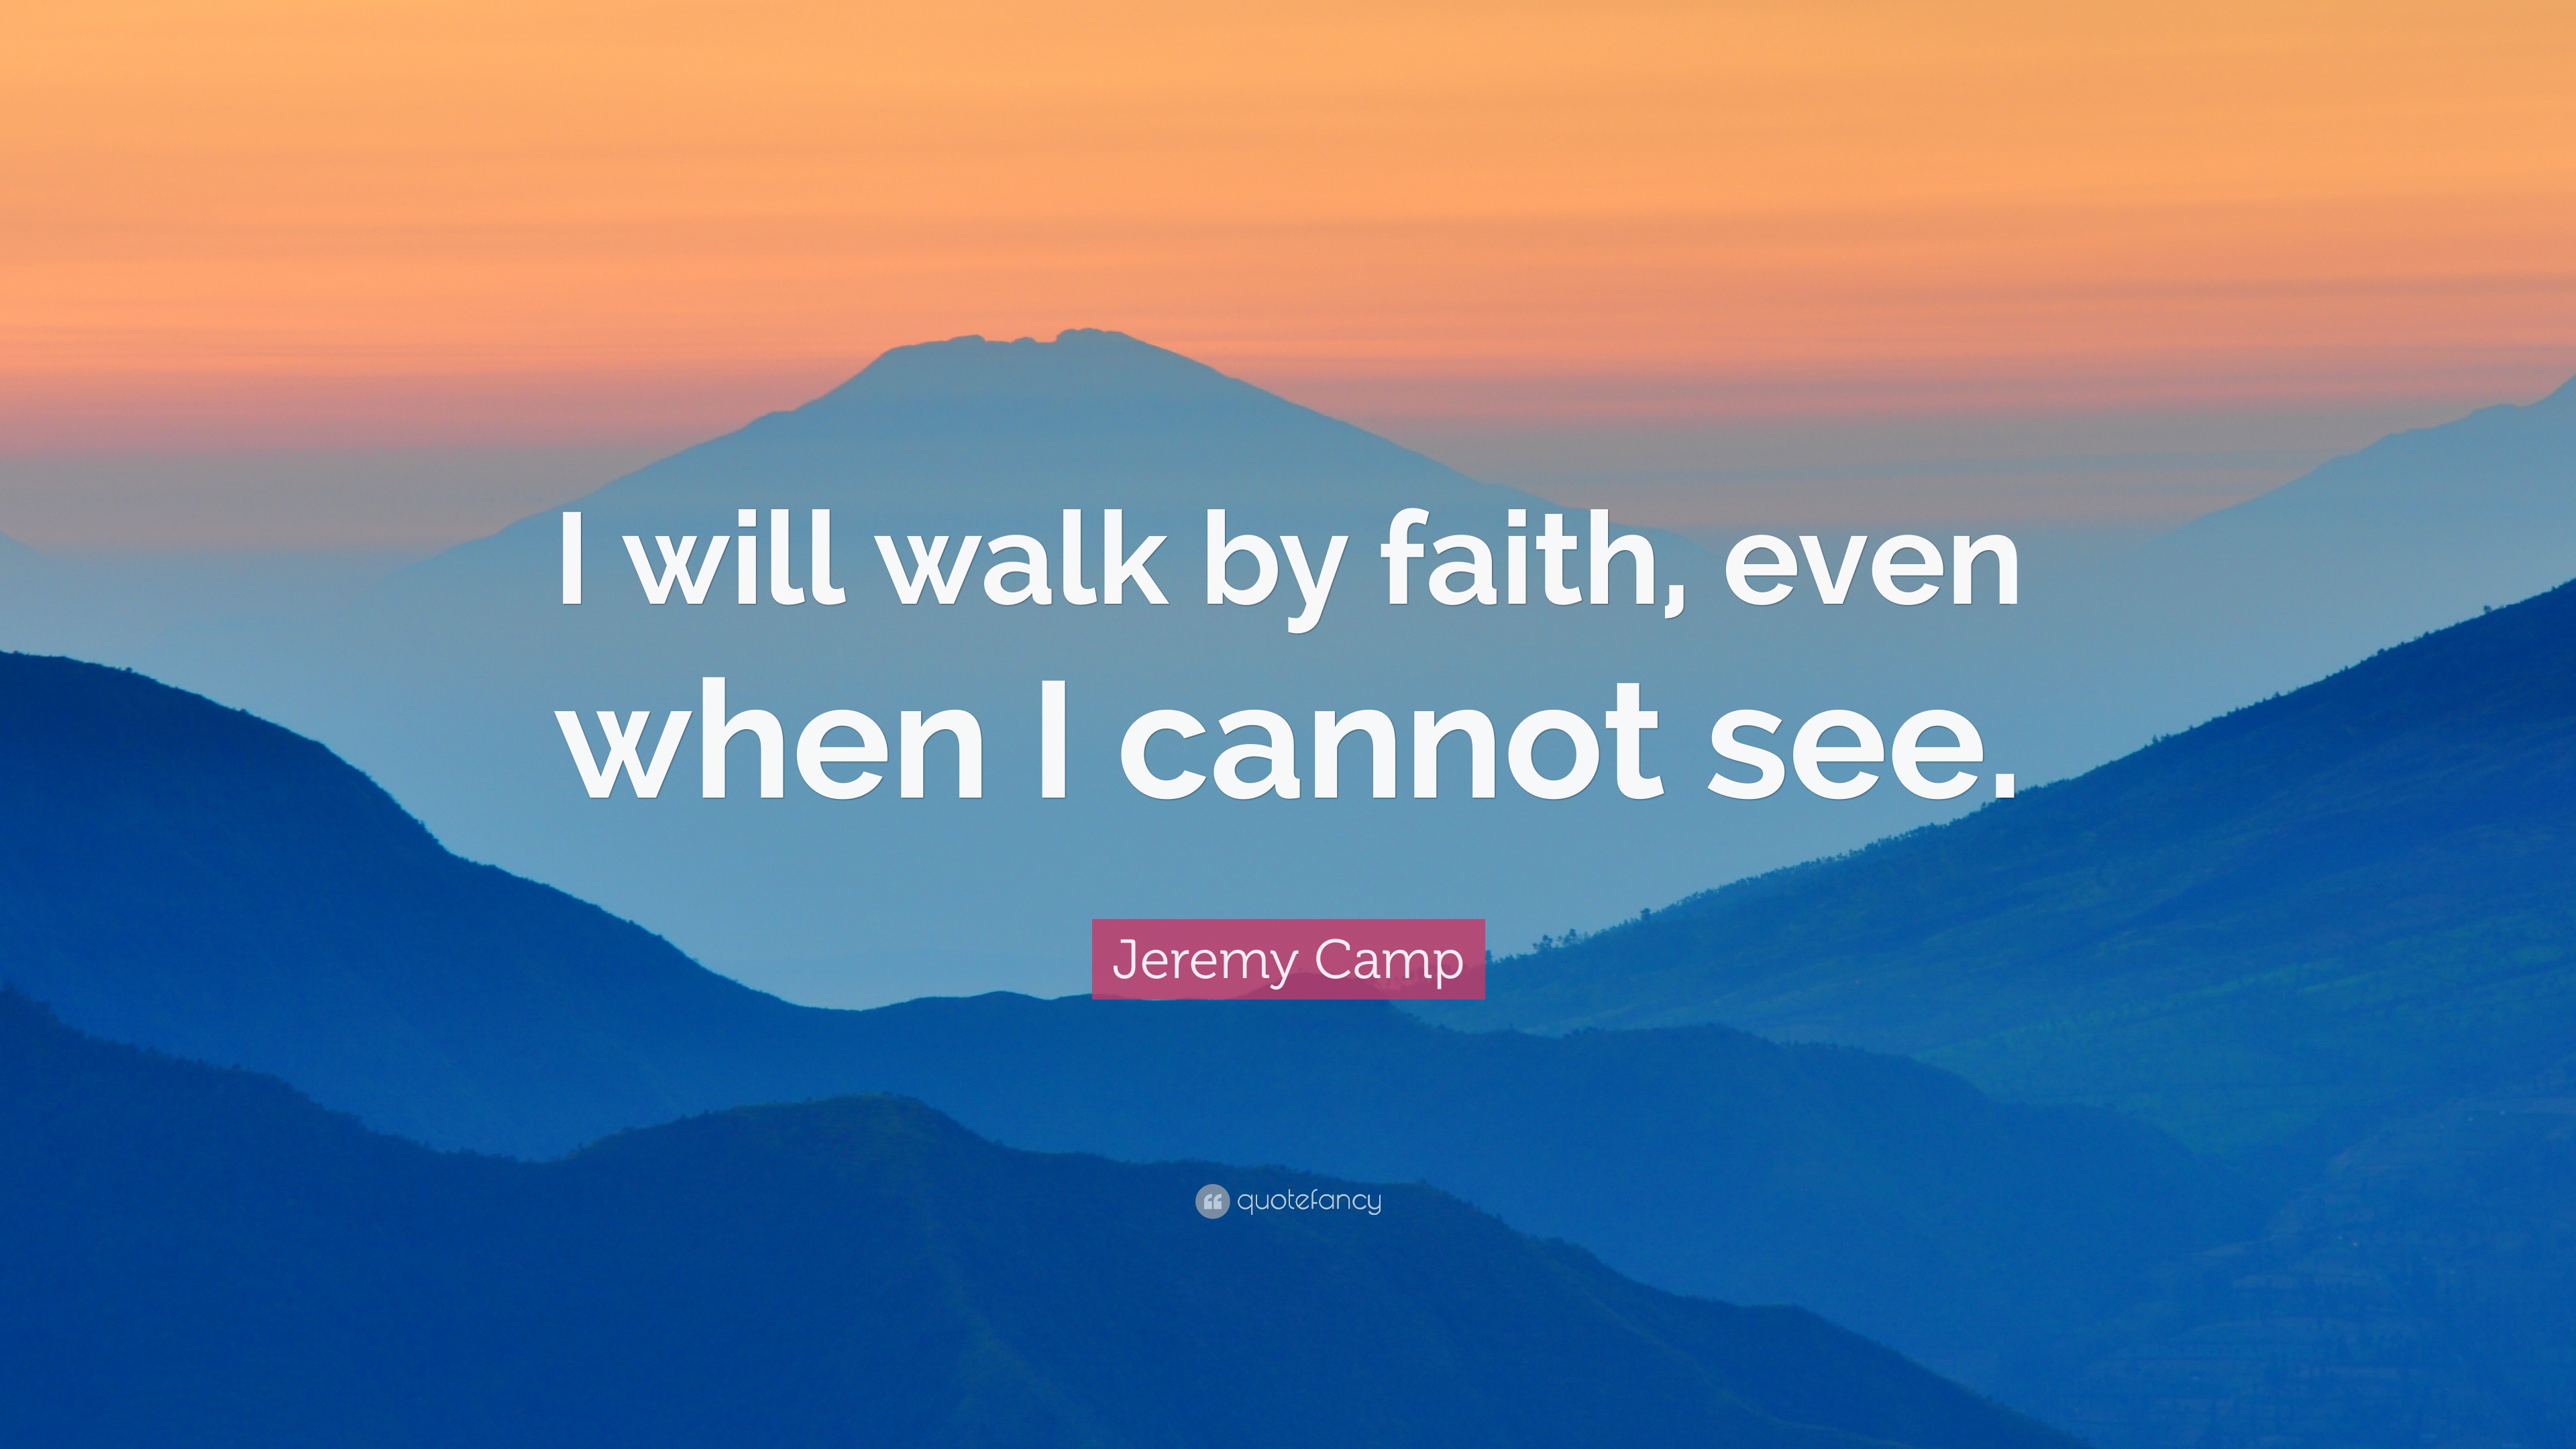 Jeremy Camp Quotes (11 wallpaper)